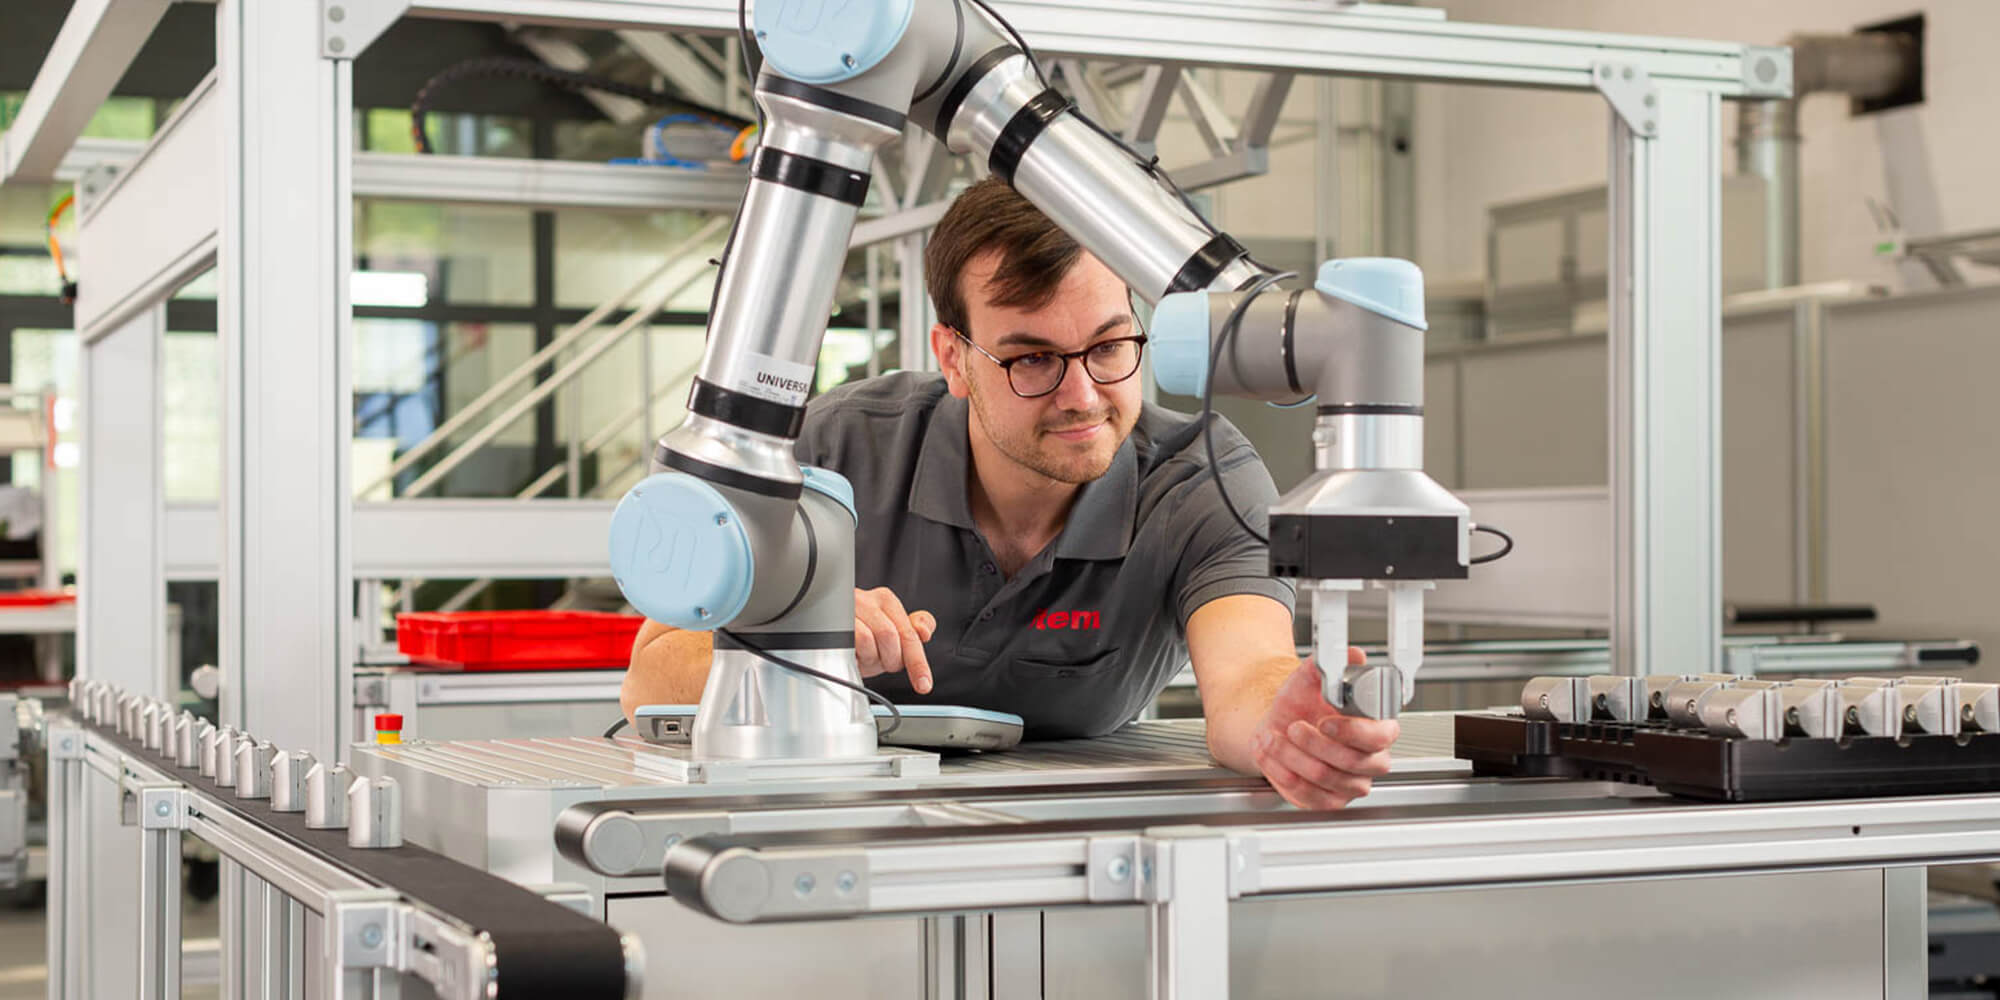 Using collaborative robots (cobots) in production